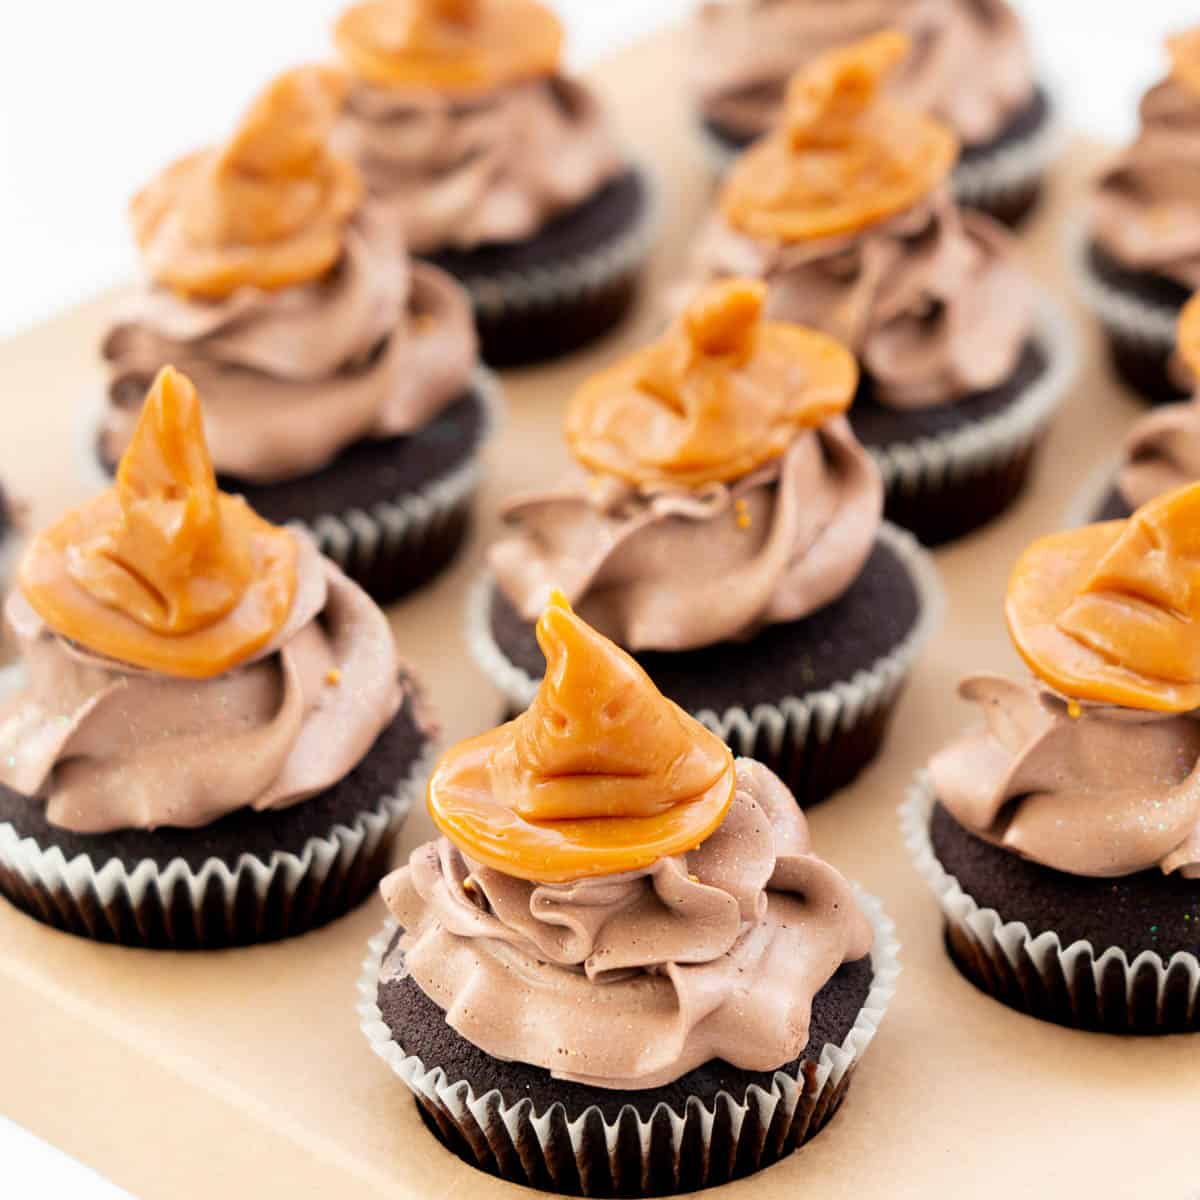 Chocolate cupcakes topped with chocolate buttercream and a caramel cupcake topper in the shape of a sorting hat from harry potter.